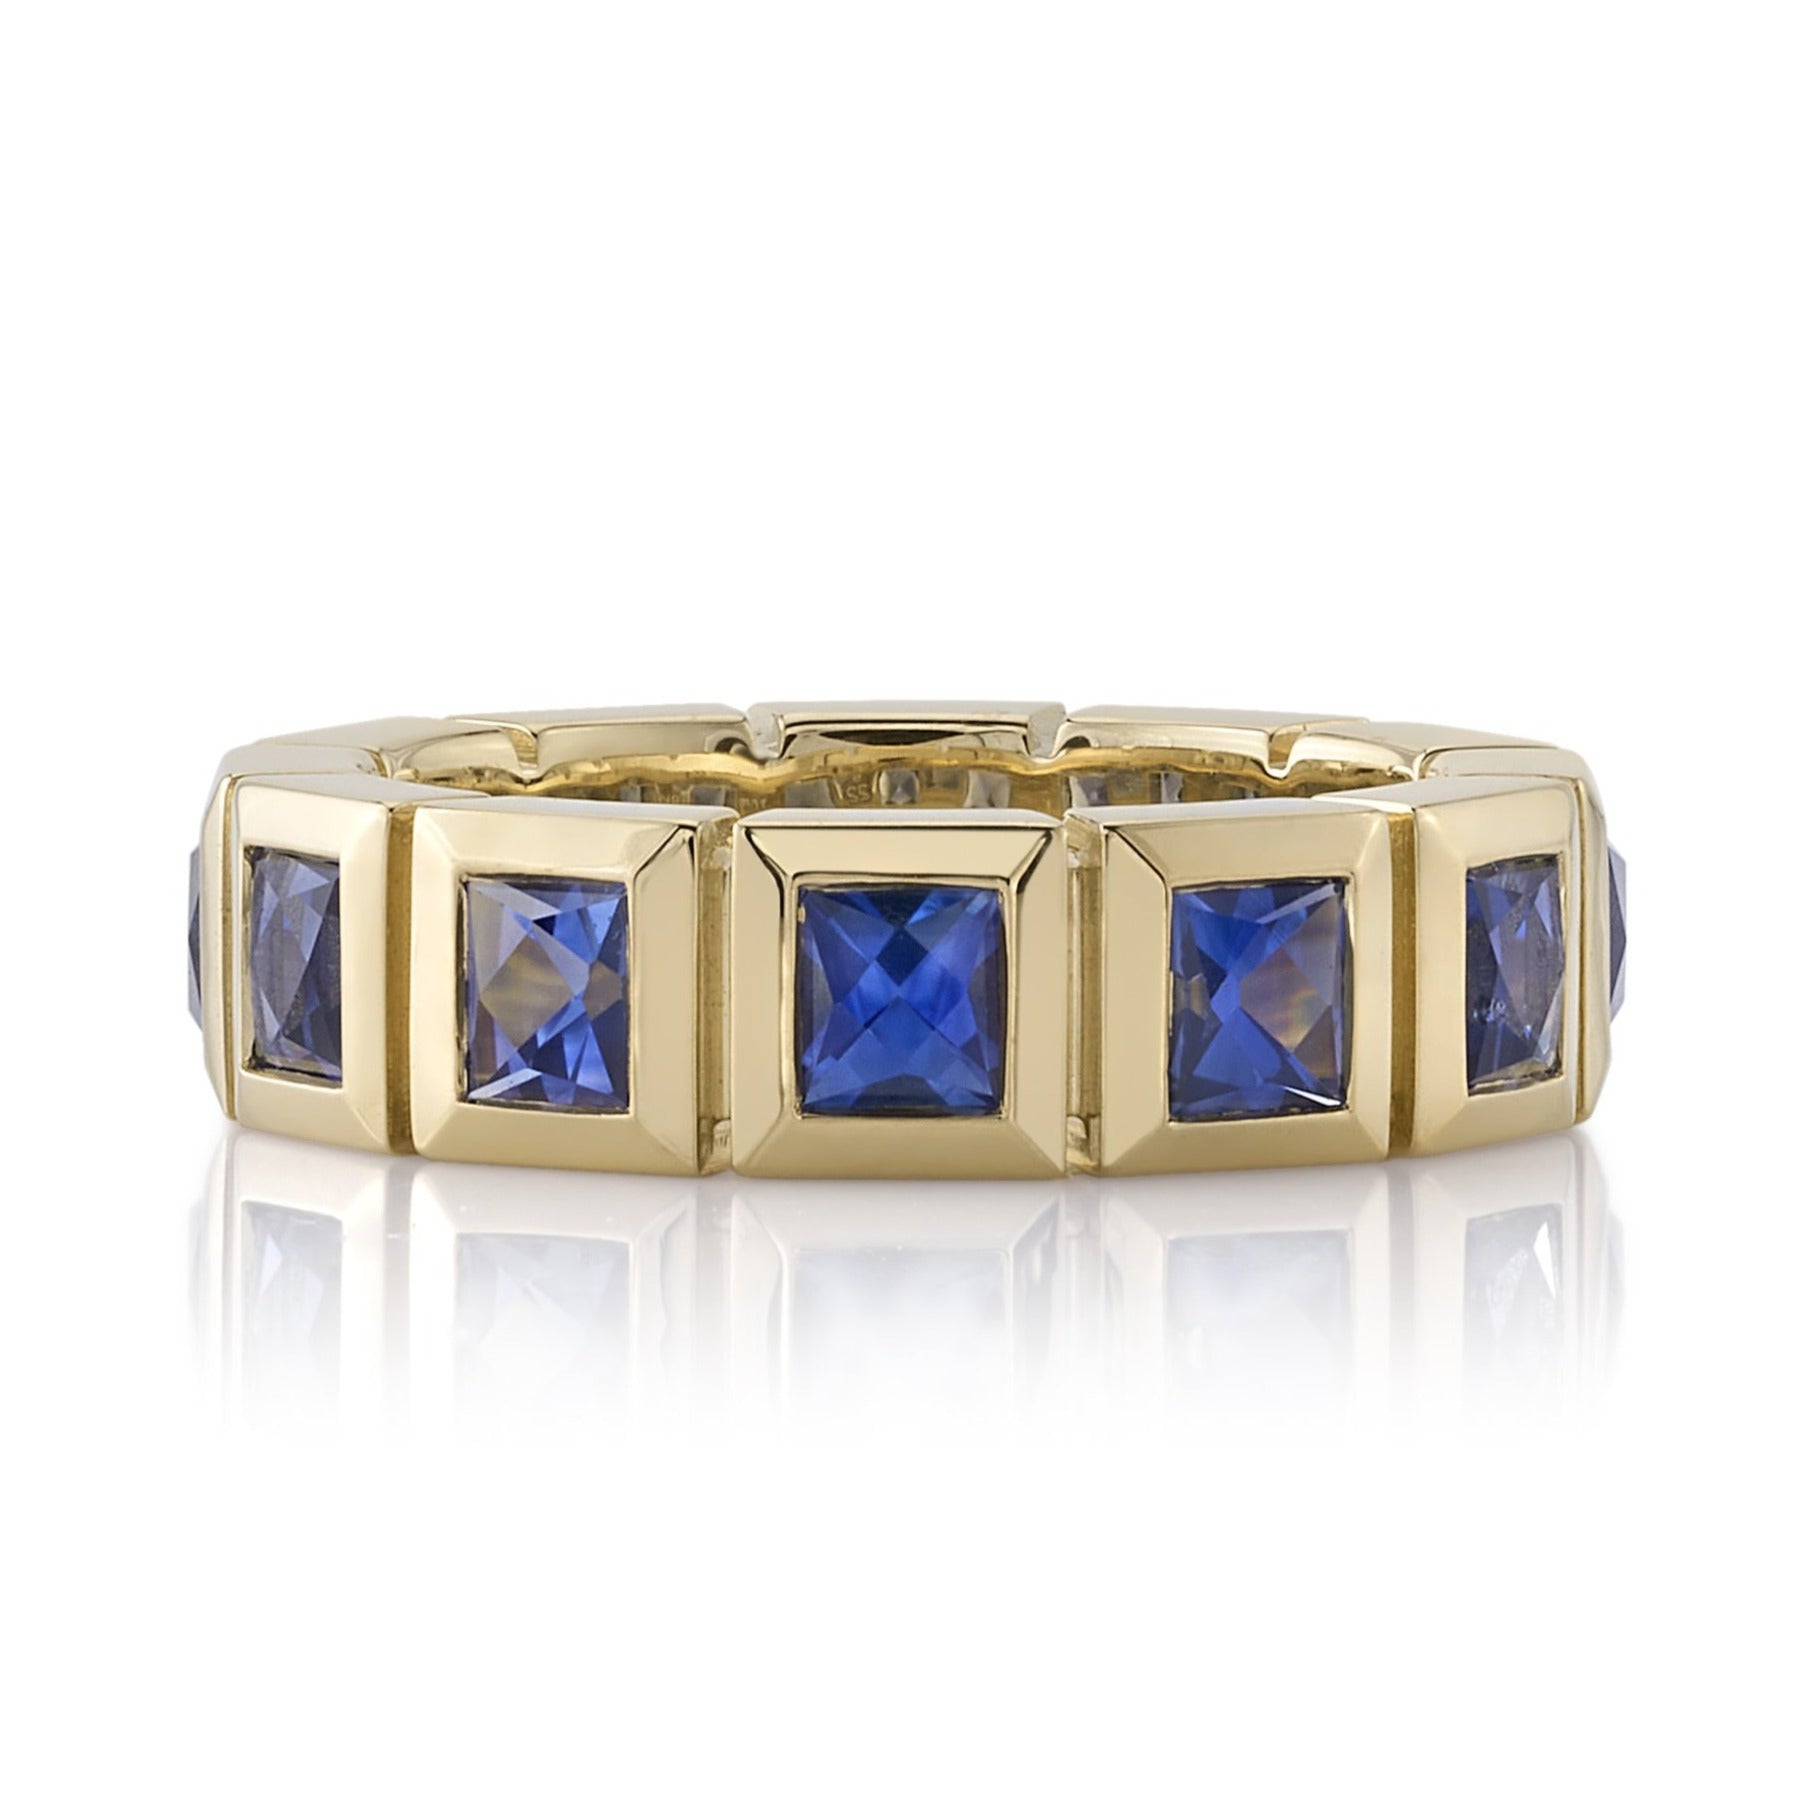 SINGLE STONE LARGE KARINA WITH GEMSTONES BAND | Approximately 2.75ctw-3.00ctw square French cut gemstones bezel set in a handcrafted 18K yellow gold eternity band. Available with rubies, sapphires or emeralds. Approximate band width 5.5mm. Please inquire